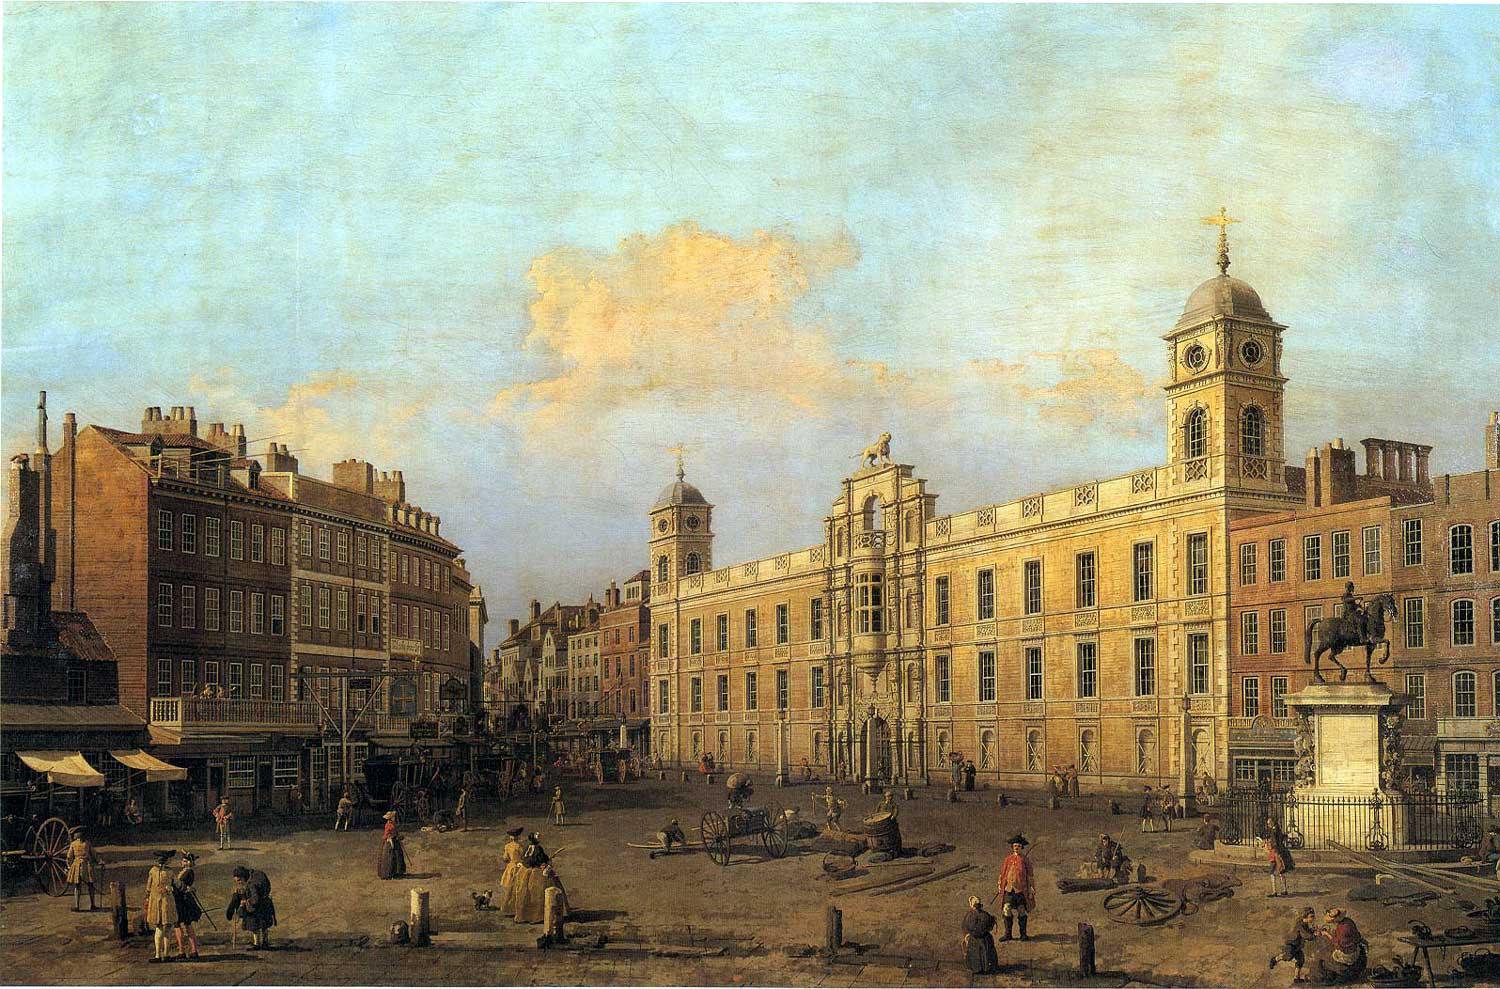 Canaletto-1697-1768 (1).jpg